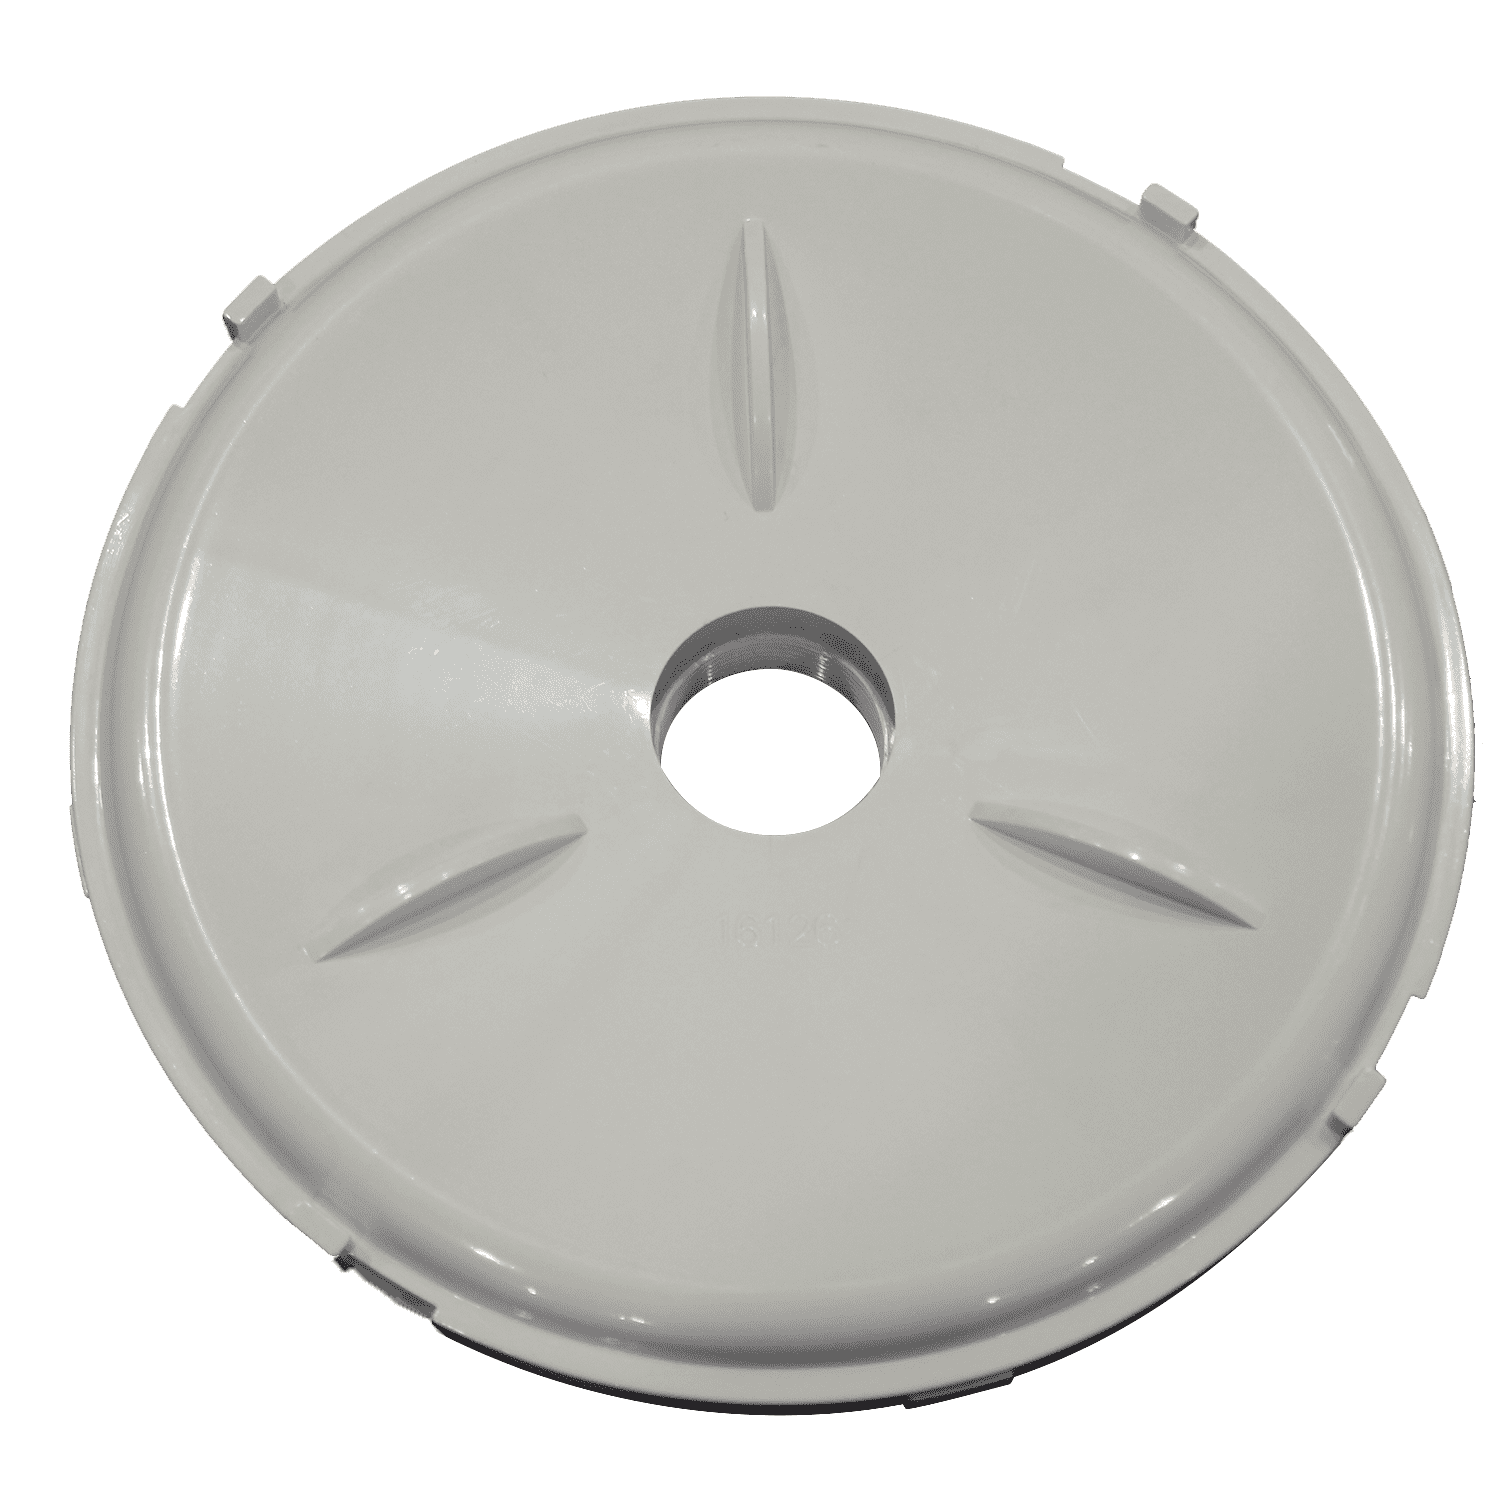 Astral Pool HSB Vacuum Plate 16126 - Efficient Pool Cleaning Accessory